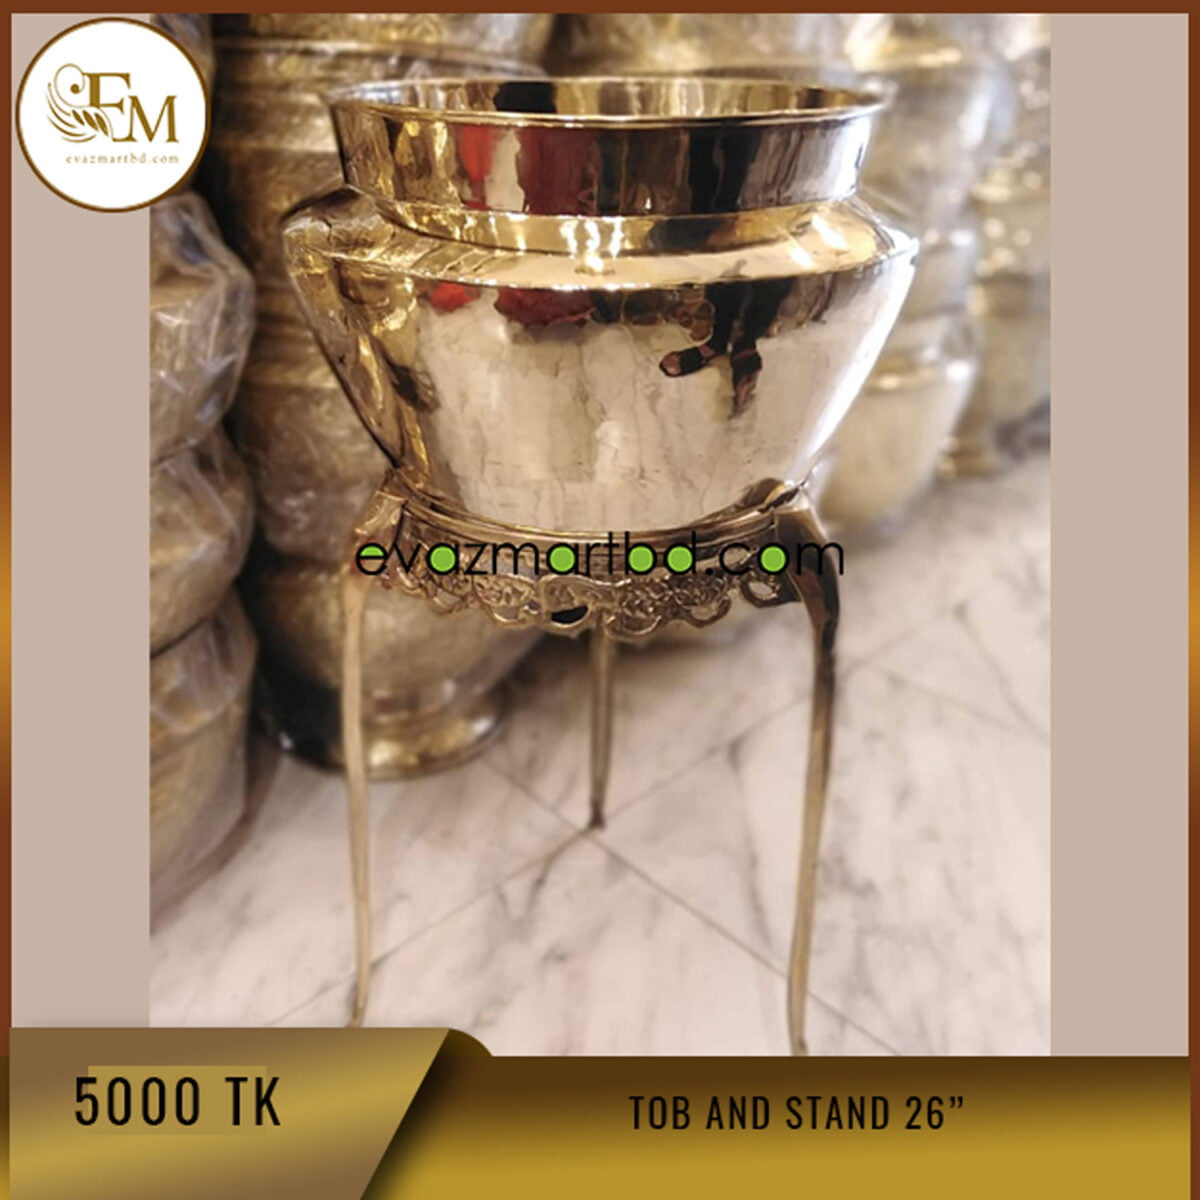 High quality brass metal designed tob and stand